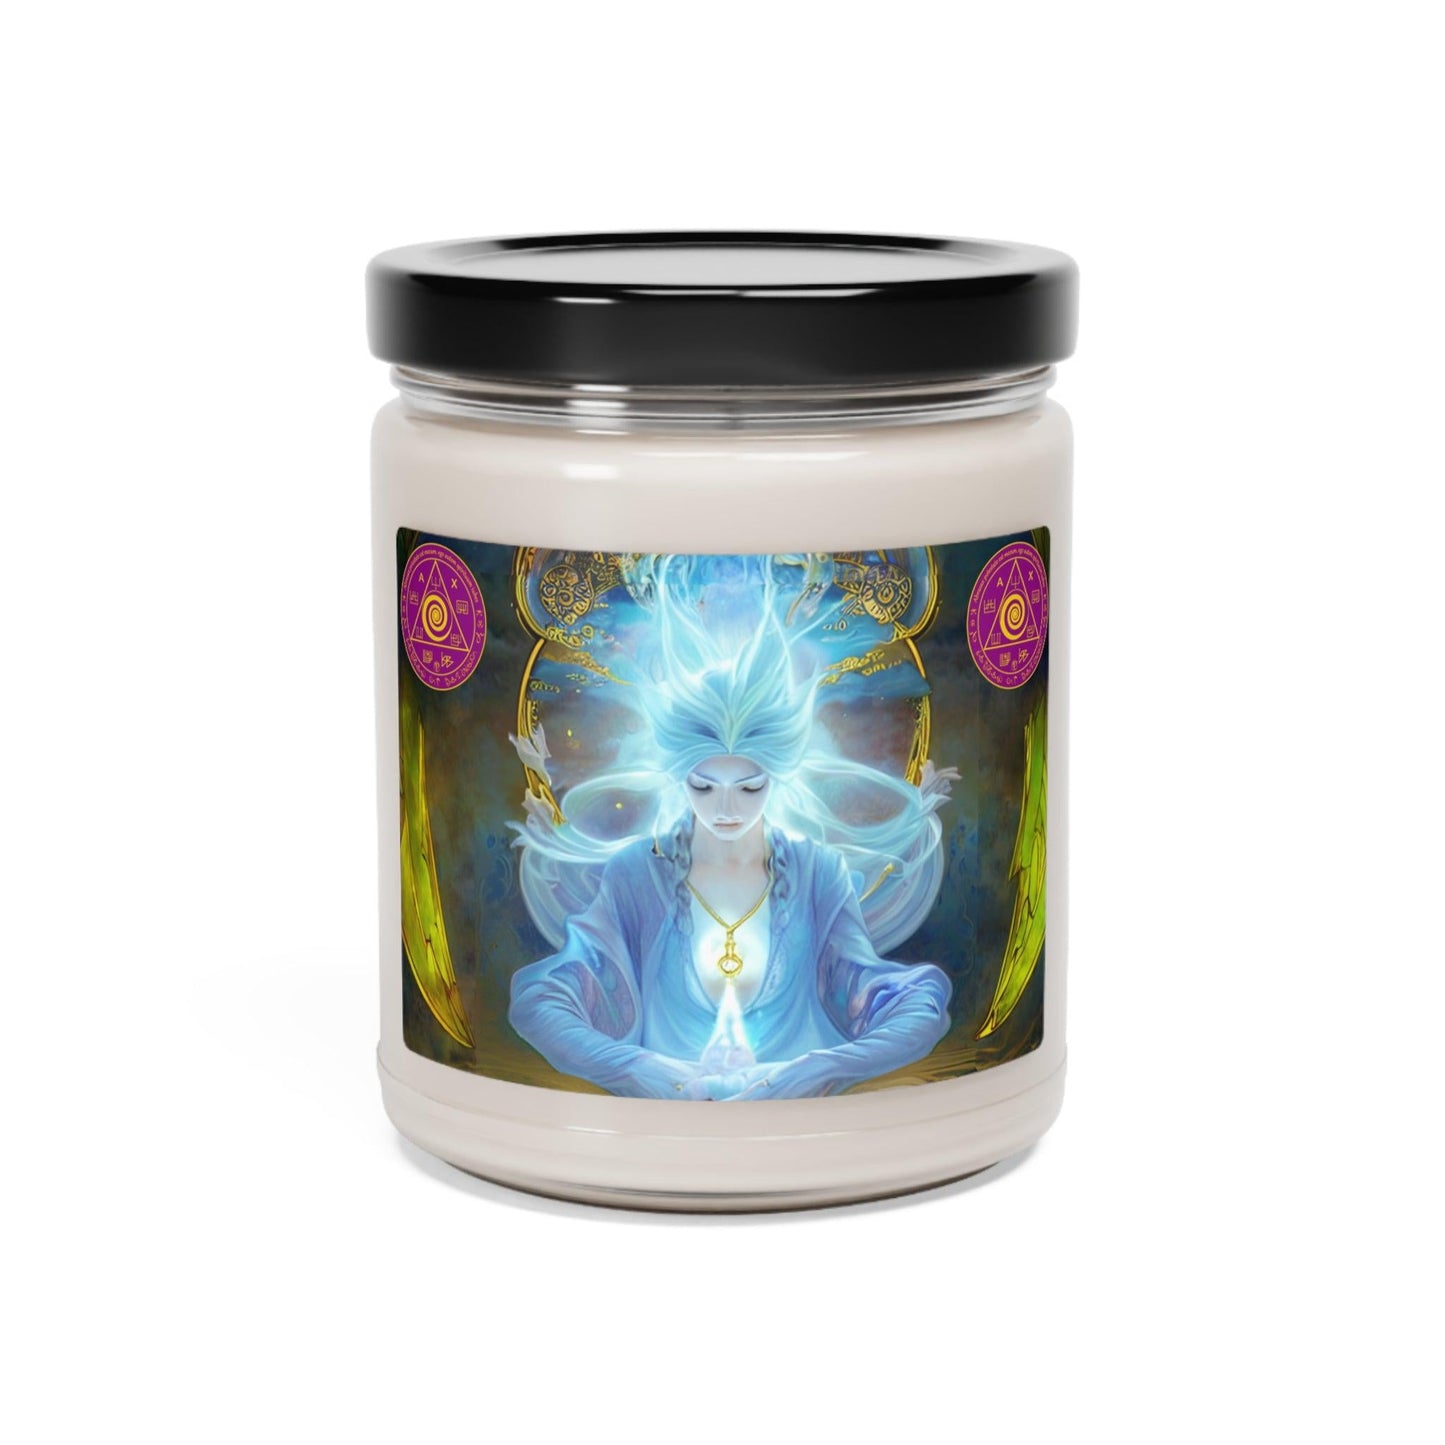 Olympic-Spirits-Cleaning-and-Protection-Scented-Soy Candle-for-offrandes-rituals-initiations-or-prier-and-meditation-6